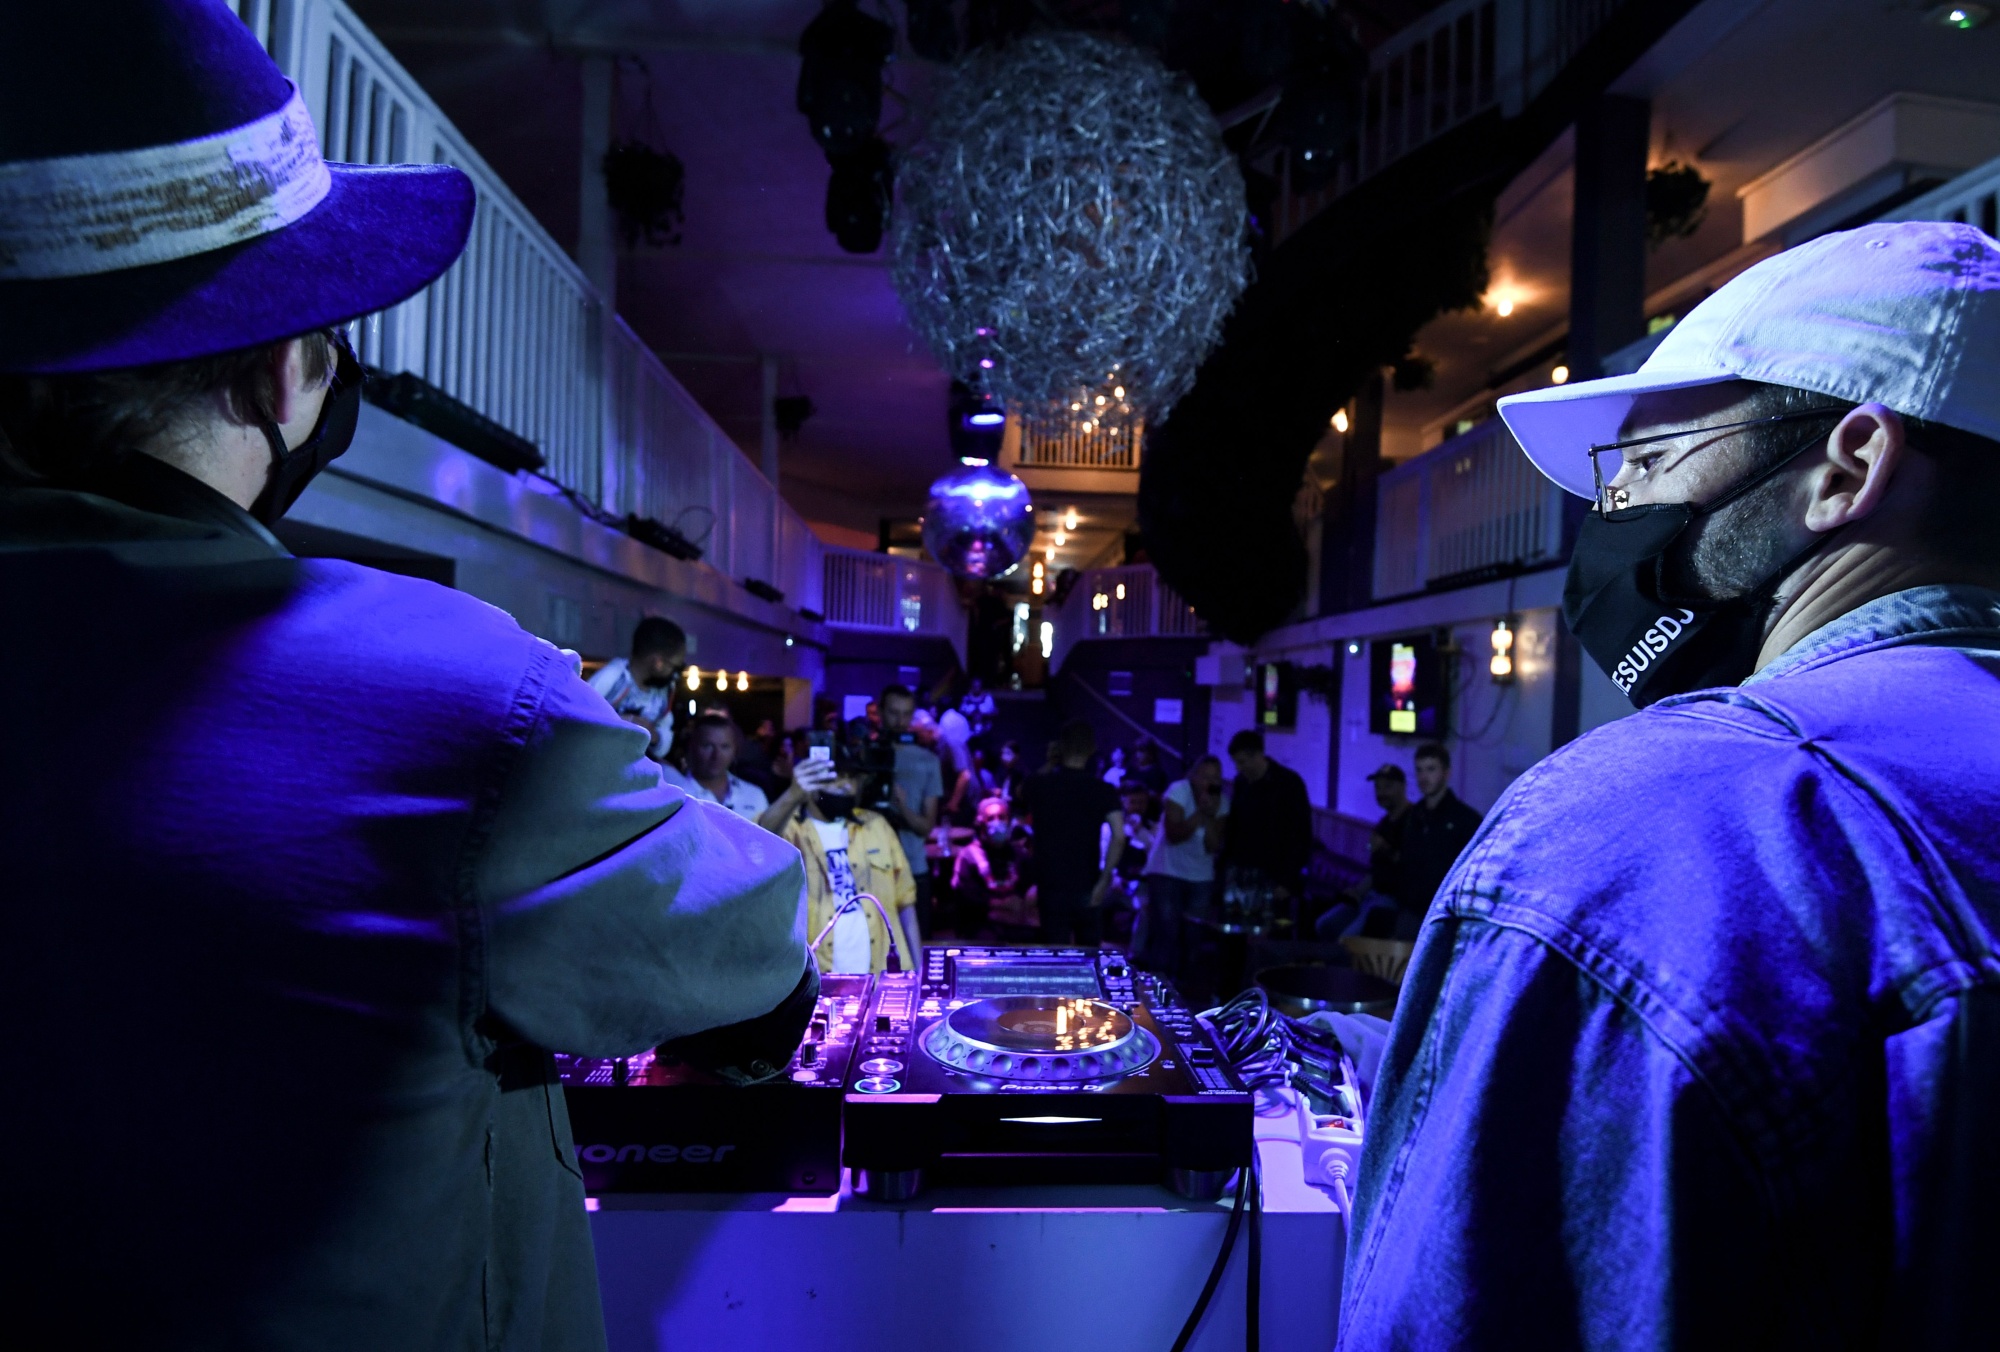 Staying alive:&nbsp;DJs&nbsp;wear face masks at the Balrock bar in Paris during an event to protest the continued closure of nightclubs and music events due to the coronavirus pandemic.&nbsp;